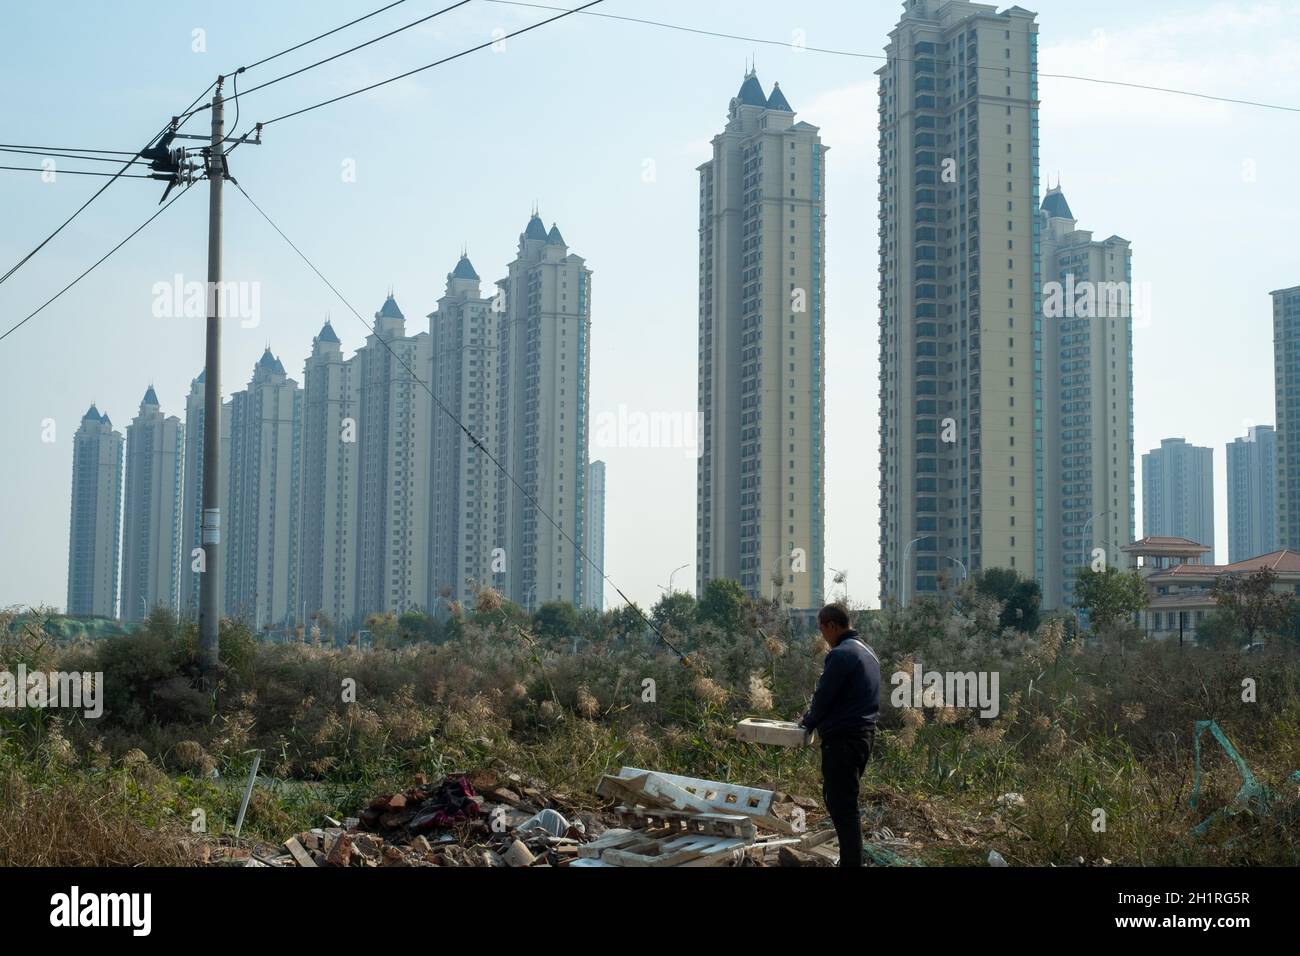 An elderly villager walks in front of the Evergrande residential properties in Wuqing district, Tianjin, China. 19-Oct-2021 Stock Photo